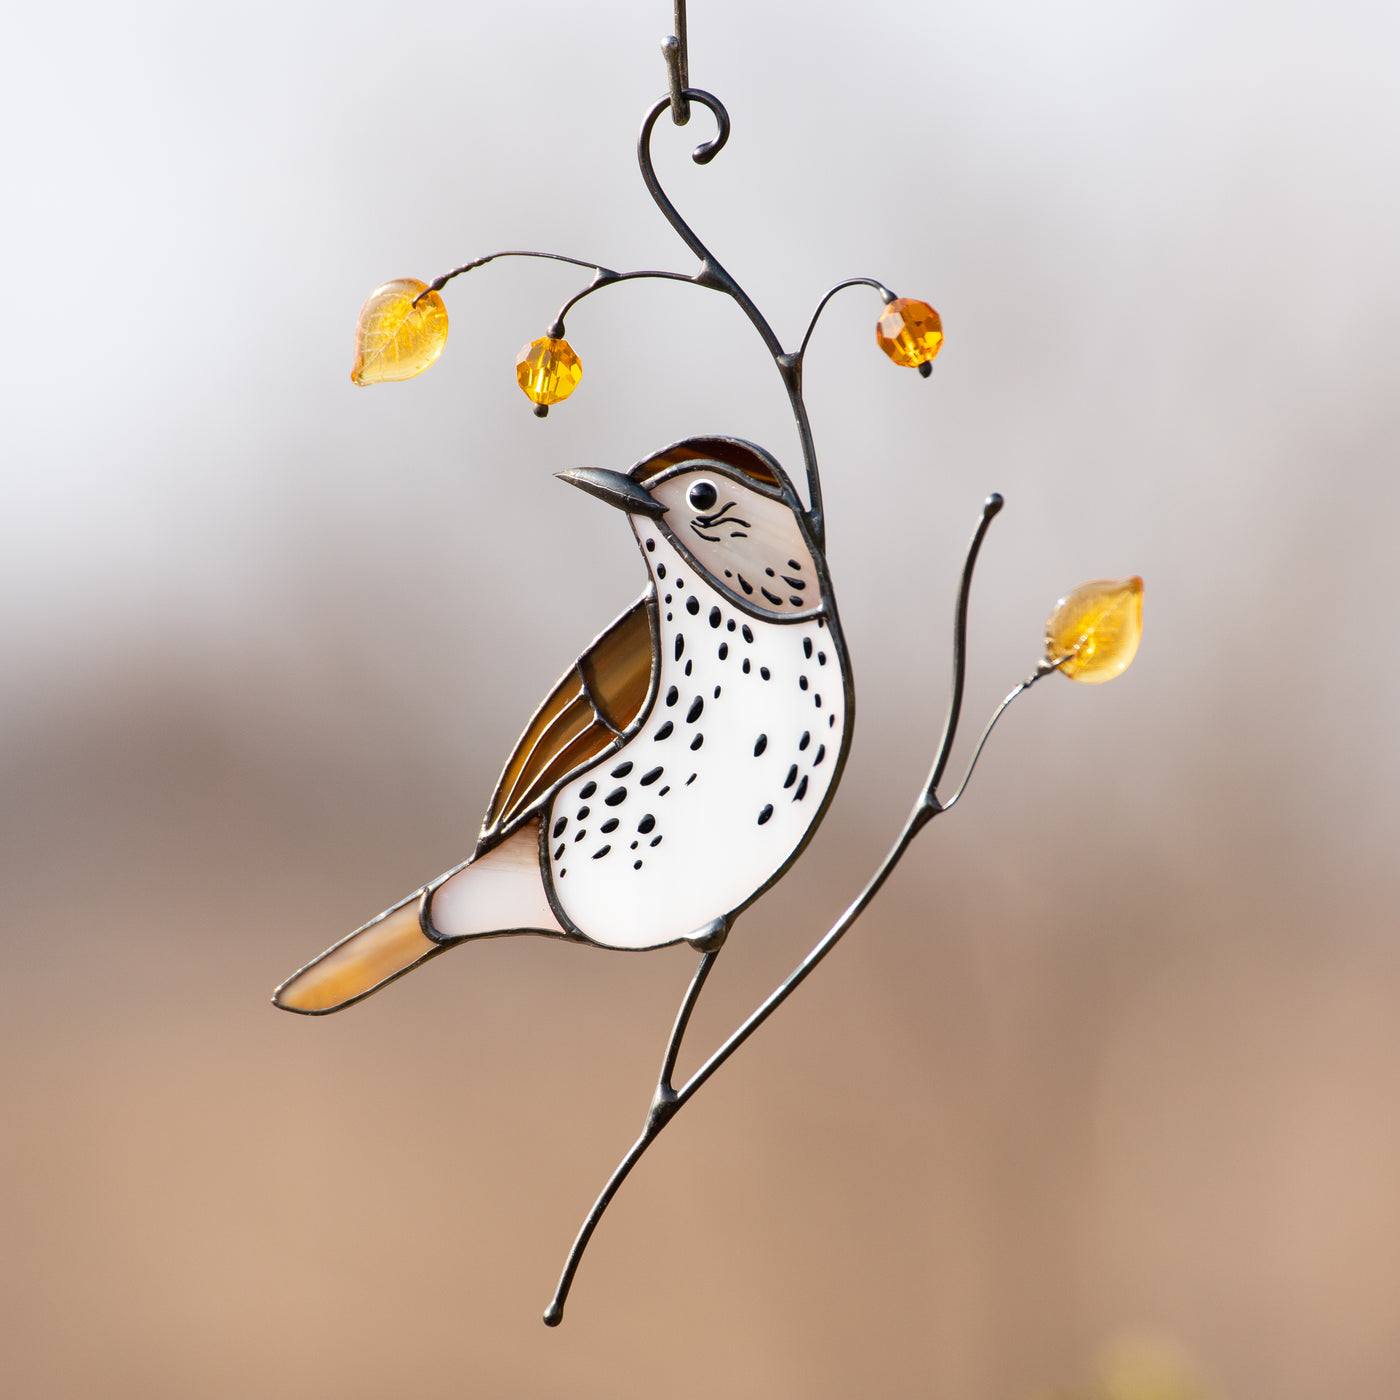 light catcher of wood thrush with yellow leaves and berries